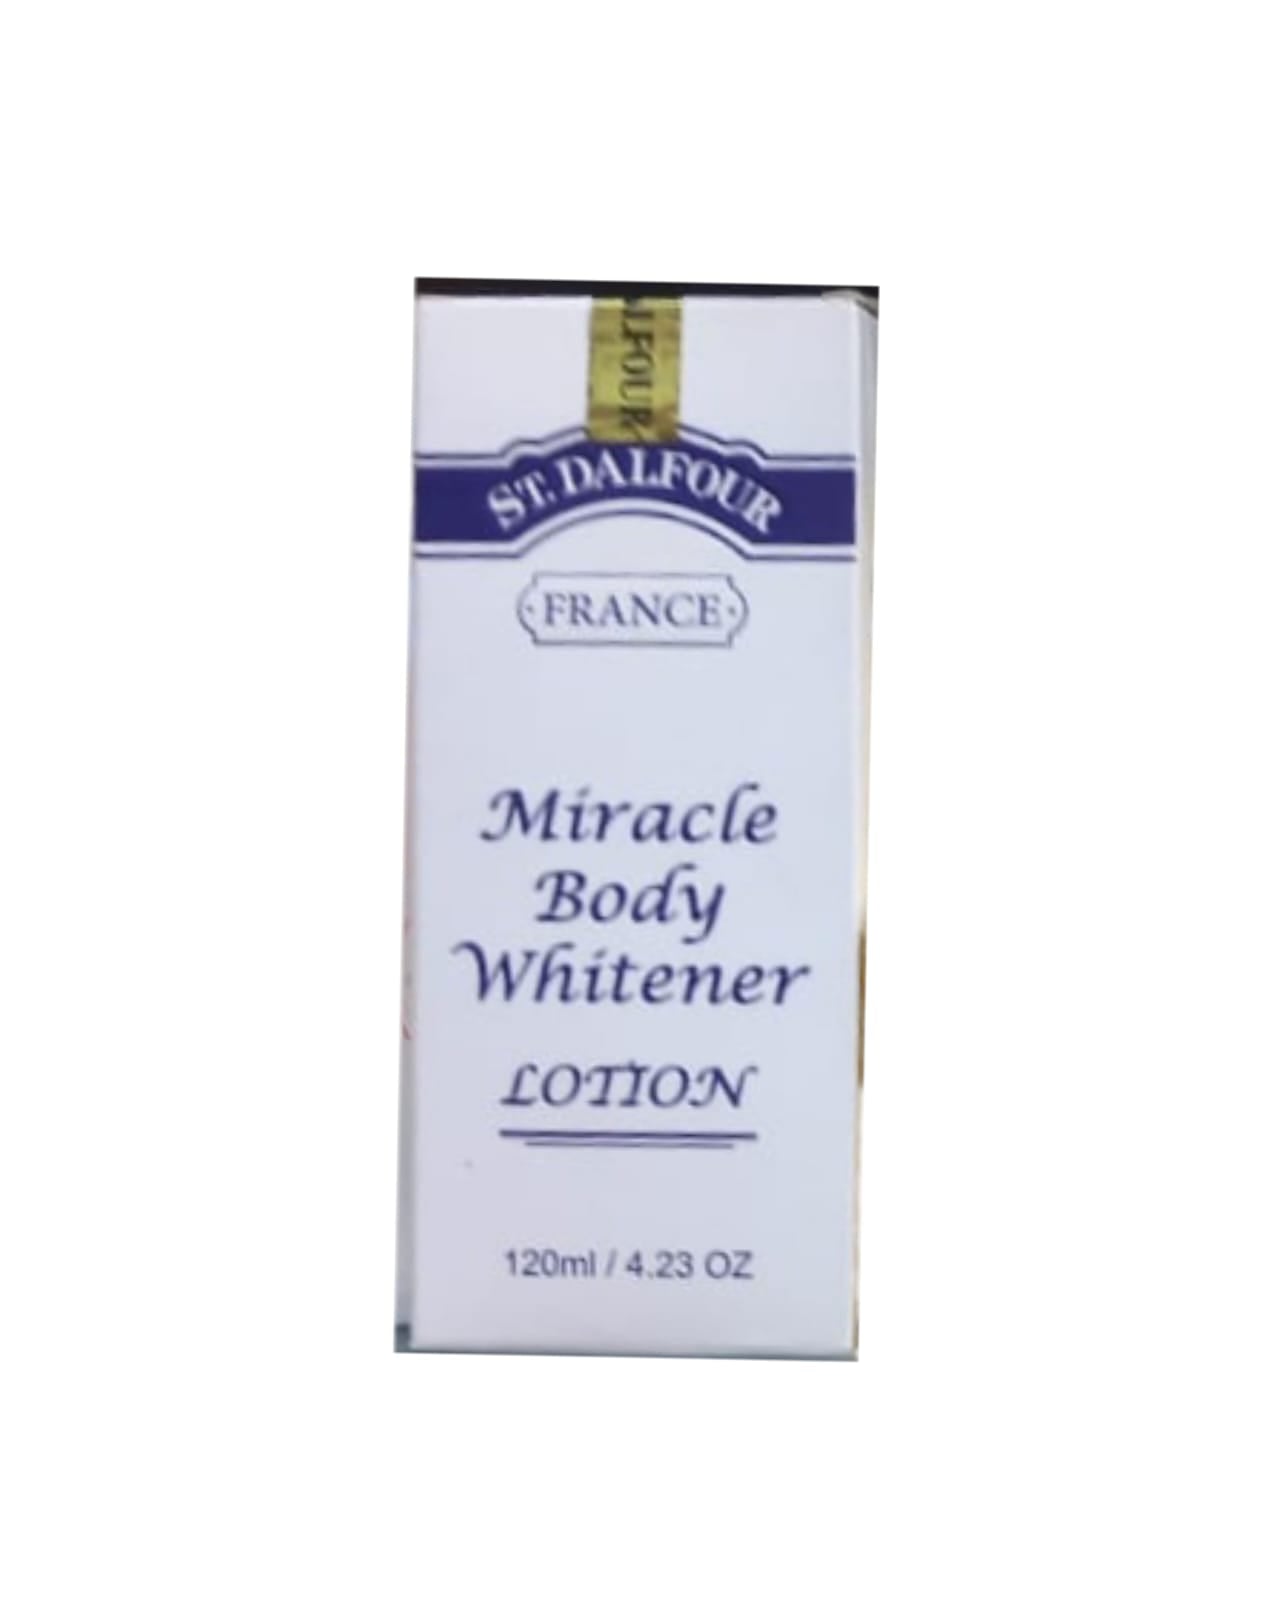 ST.Dalfour France Miracle Body Whitener Lotion